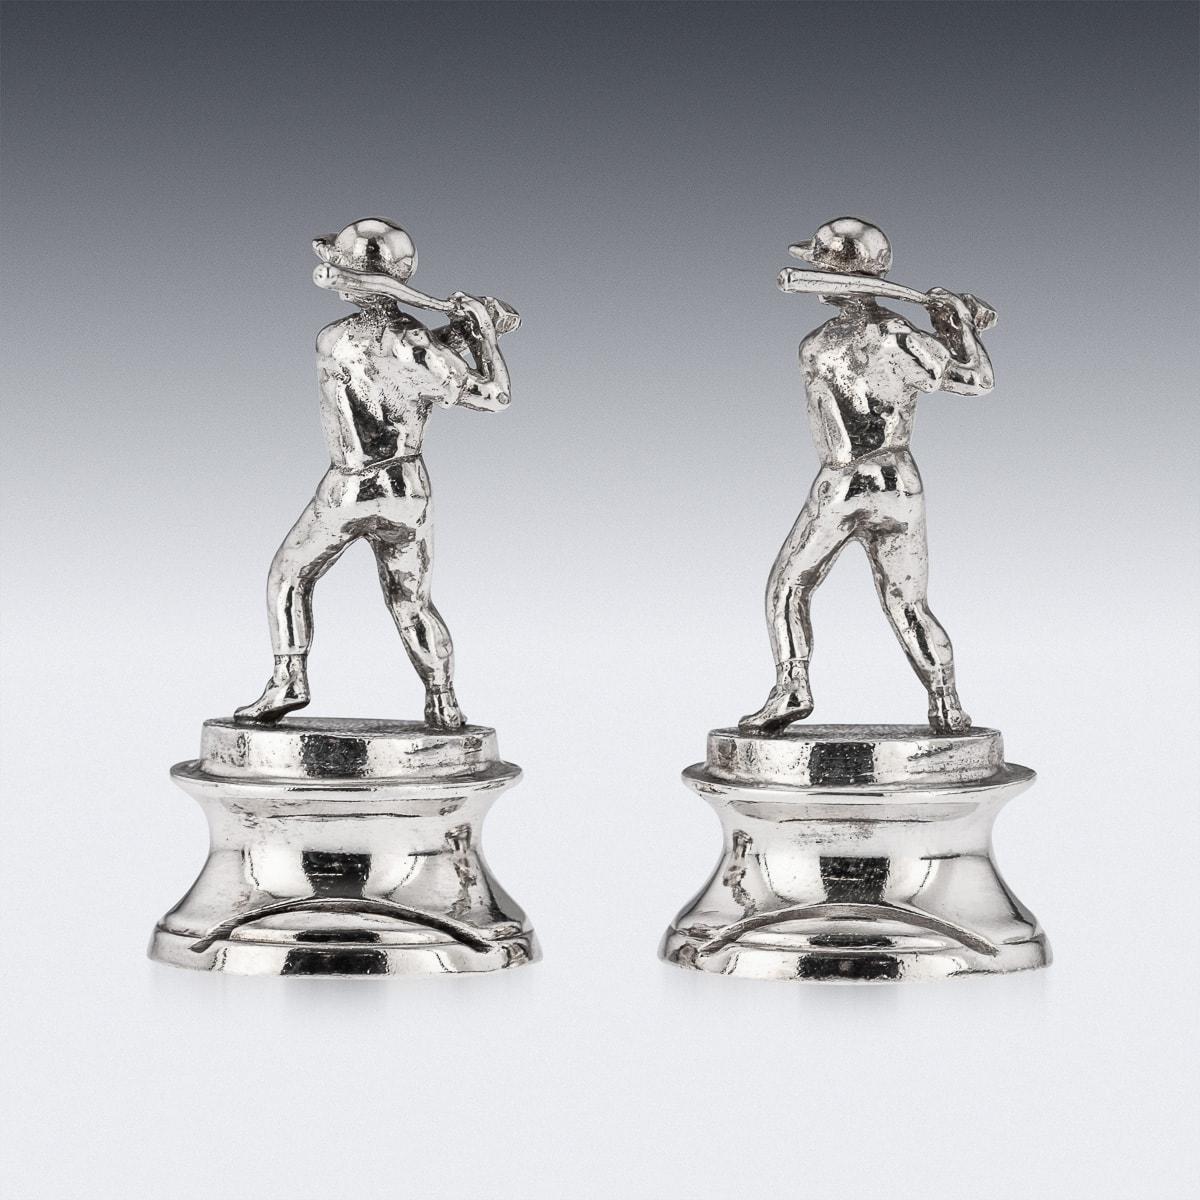 Novelty 20th Century solid silver pair of menu holders, each holder modelled as baseball player in the original retail box. Hallmarked English silver (925 Standard), London, year 1995 (v), Maker's Theo Fennell.

CONDITION
In Great Condition - No